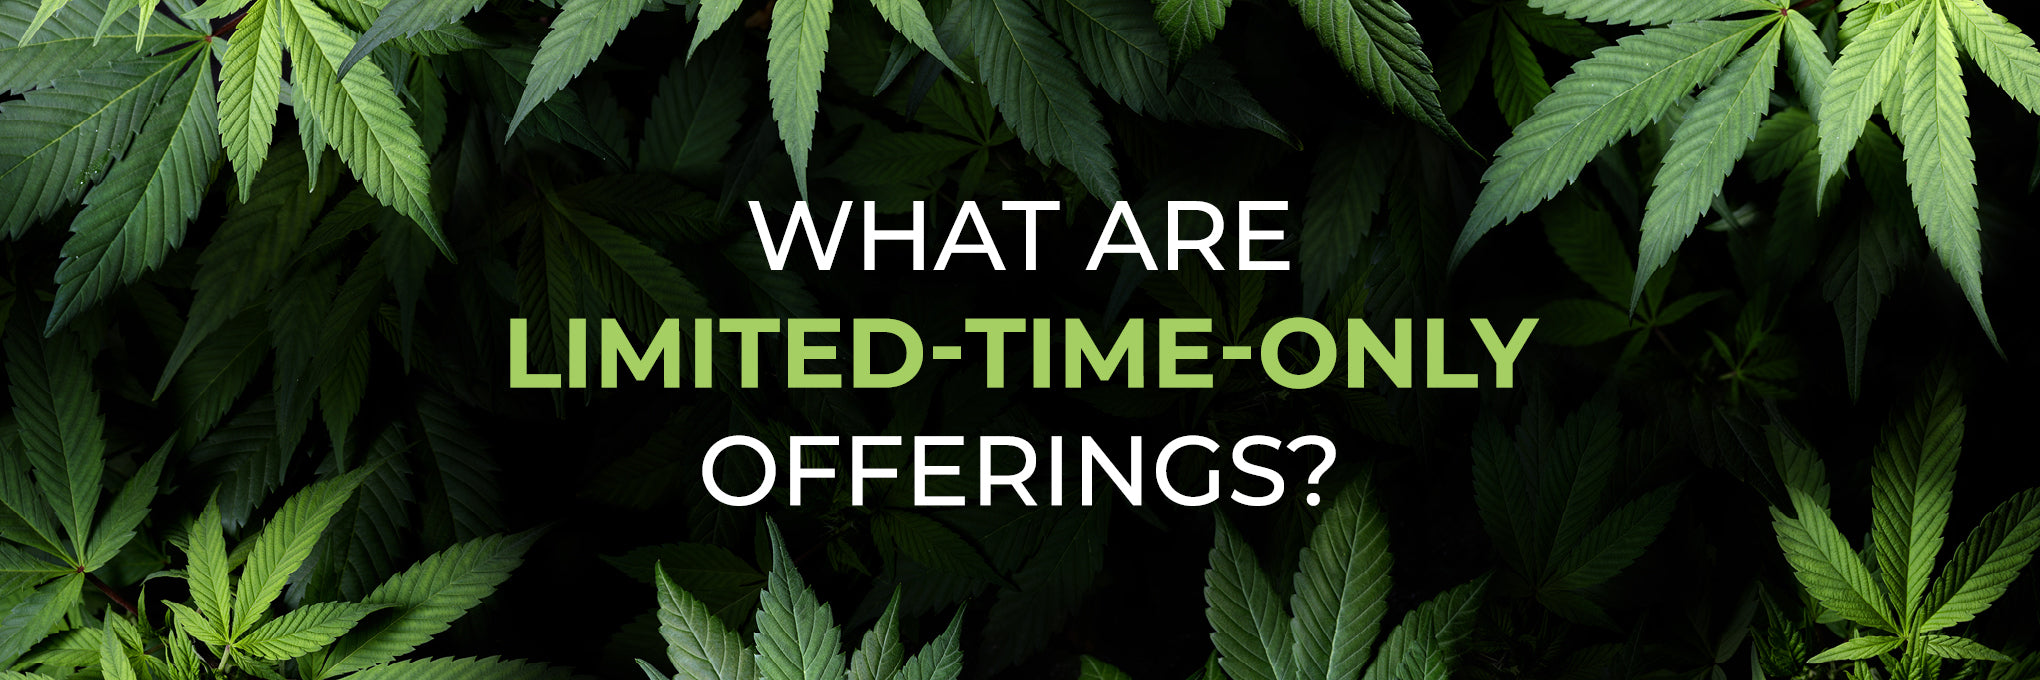 What are limited-time-only offerings?